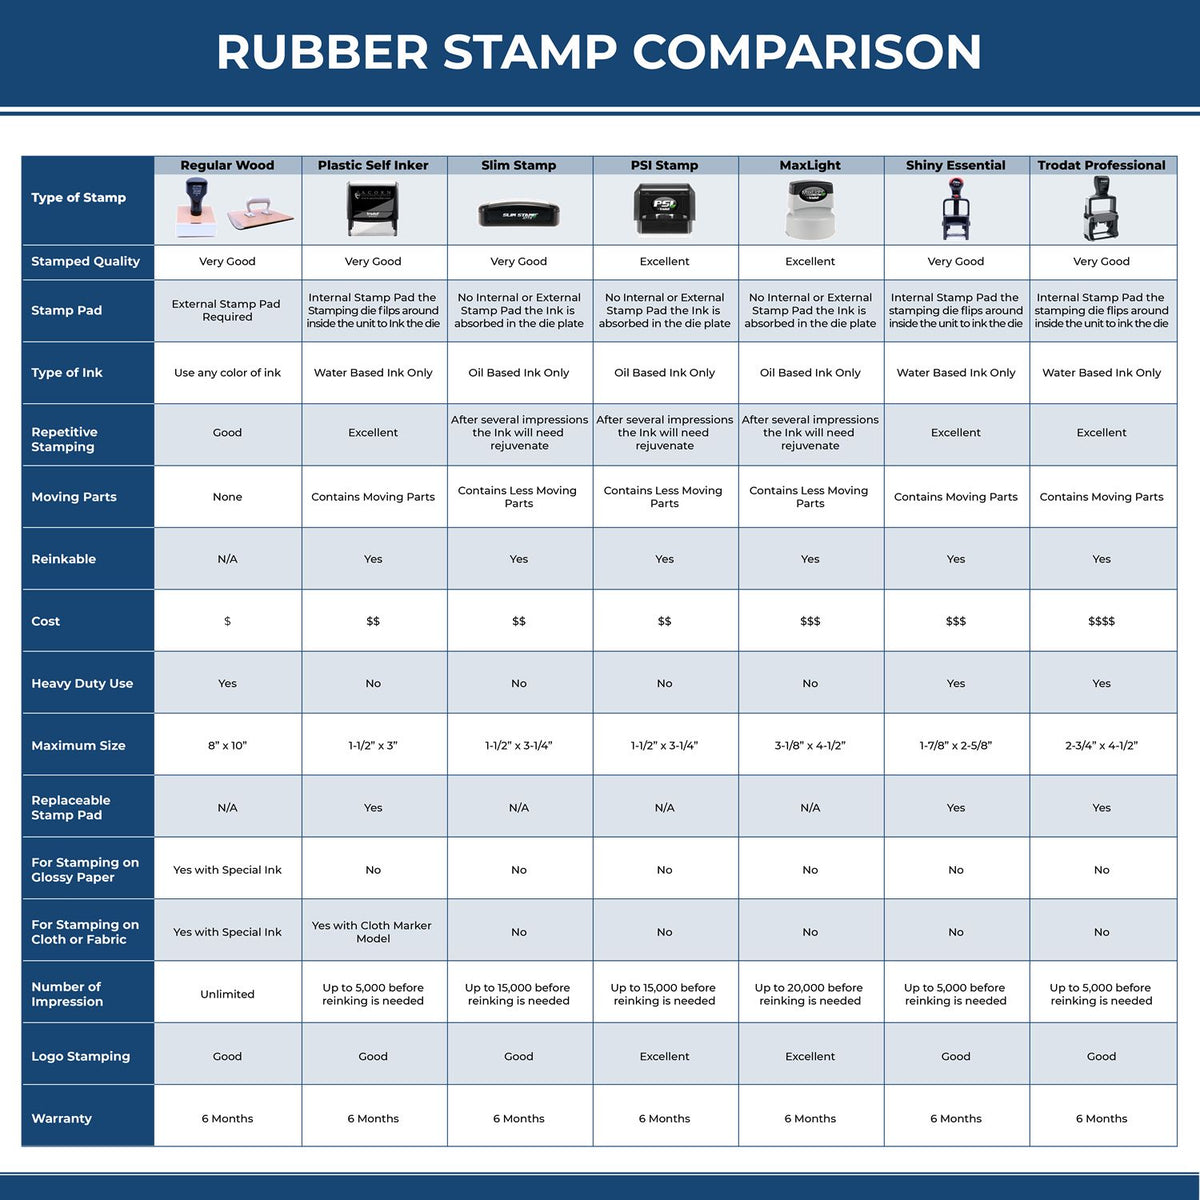 A comparison chart for the different types of mount models available for the Premium MaxLight Pre-Inked South Dakota Landscape Architectural Stamp.